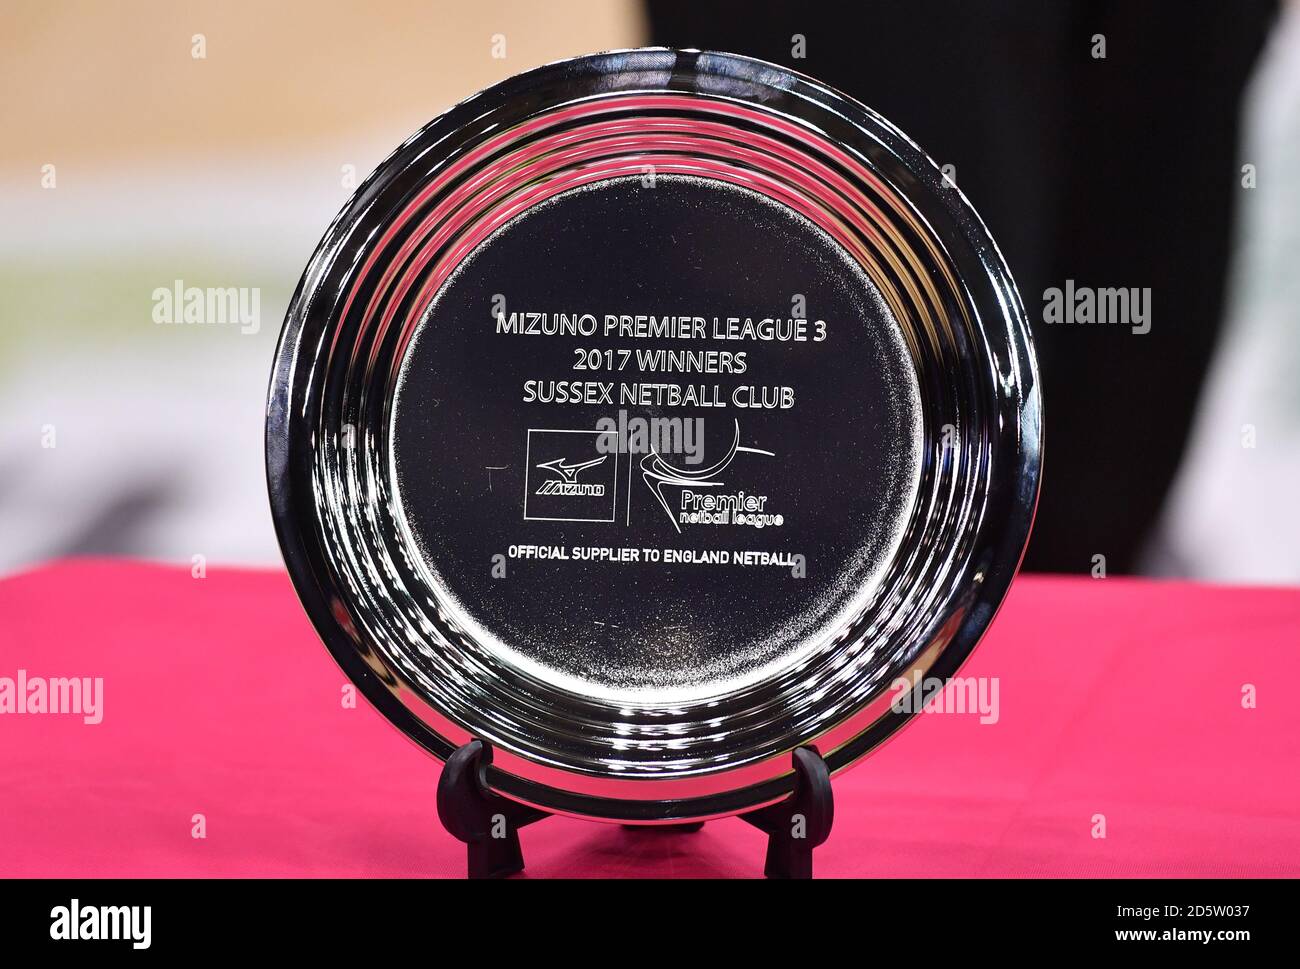 A general view of the Award presented to Sussex Netball Club for winning the2017 Mizuno Premier League 3 Stock Photo